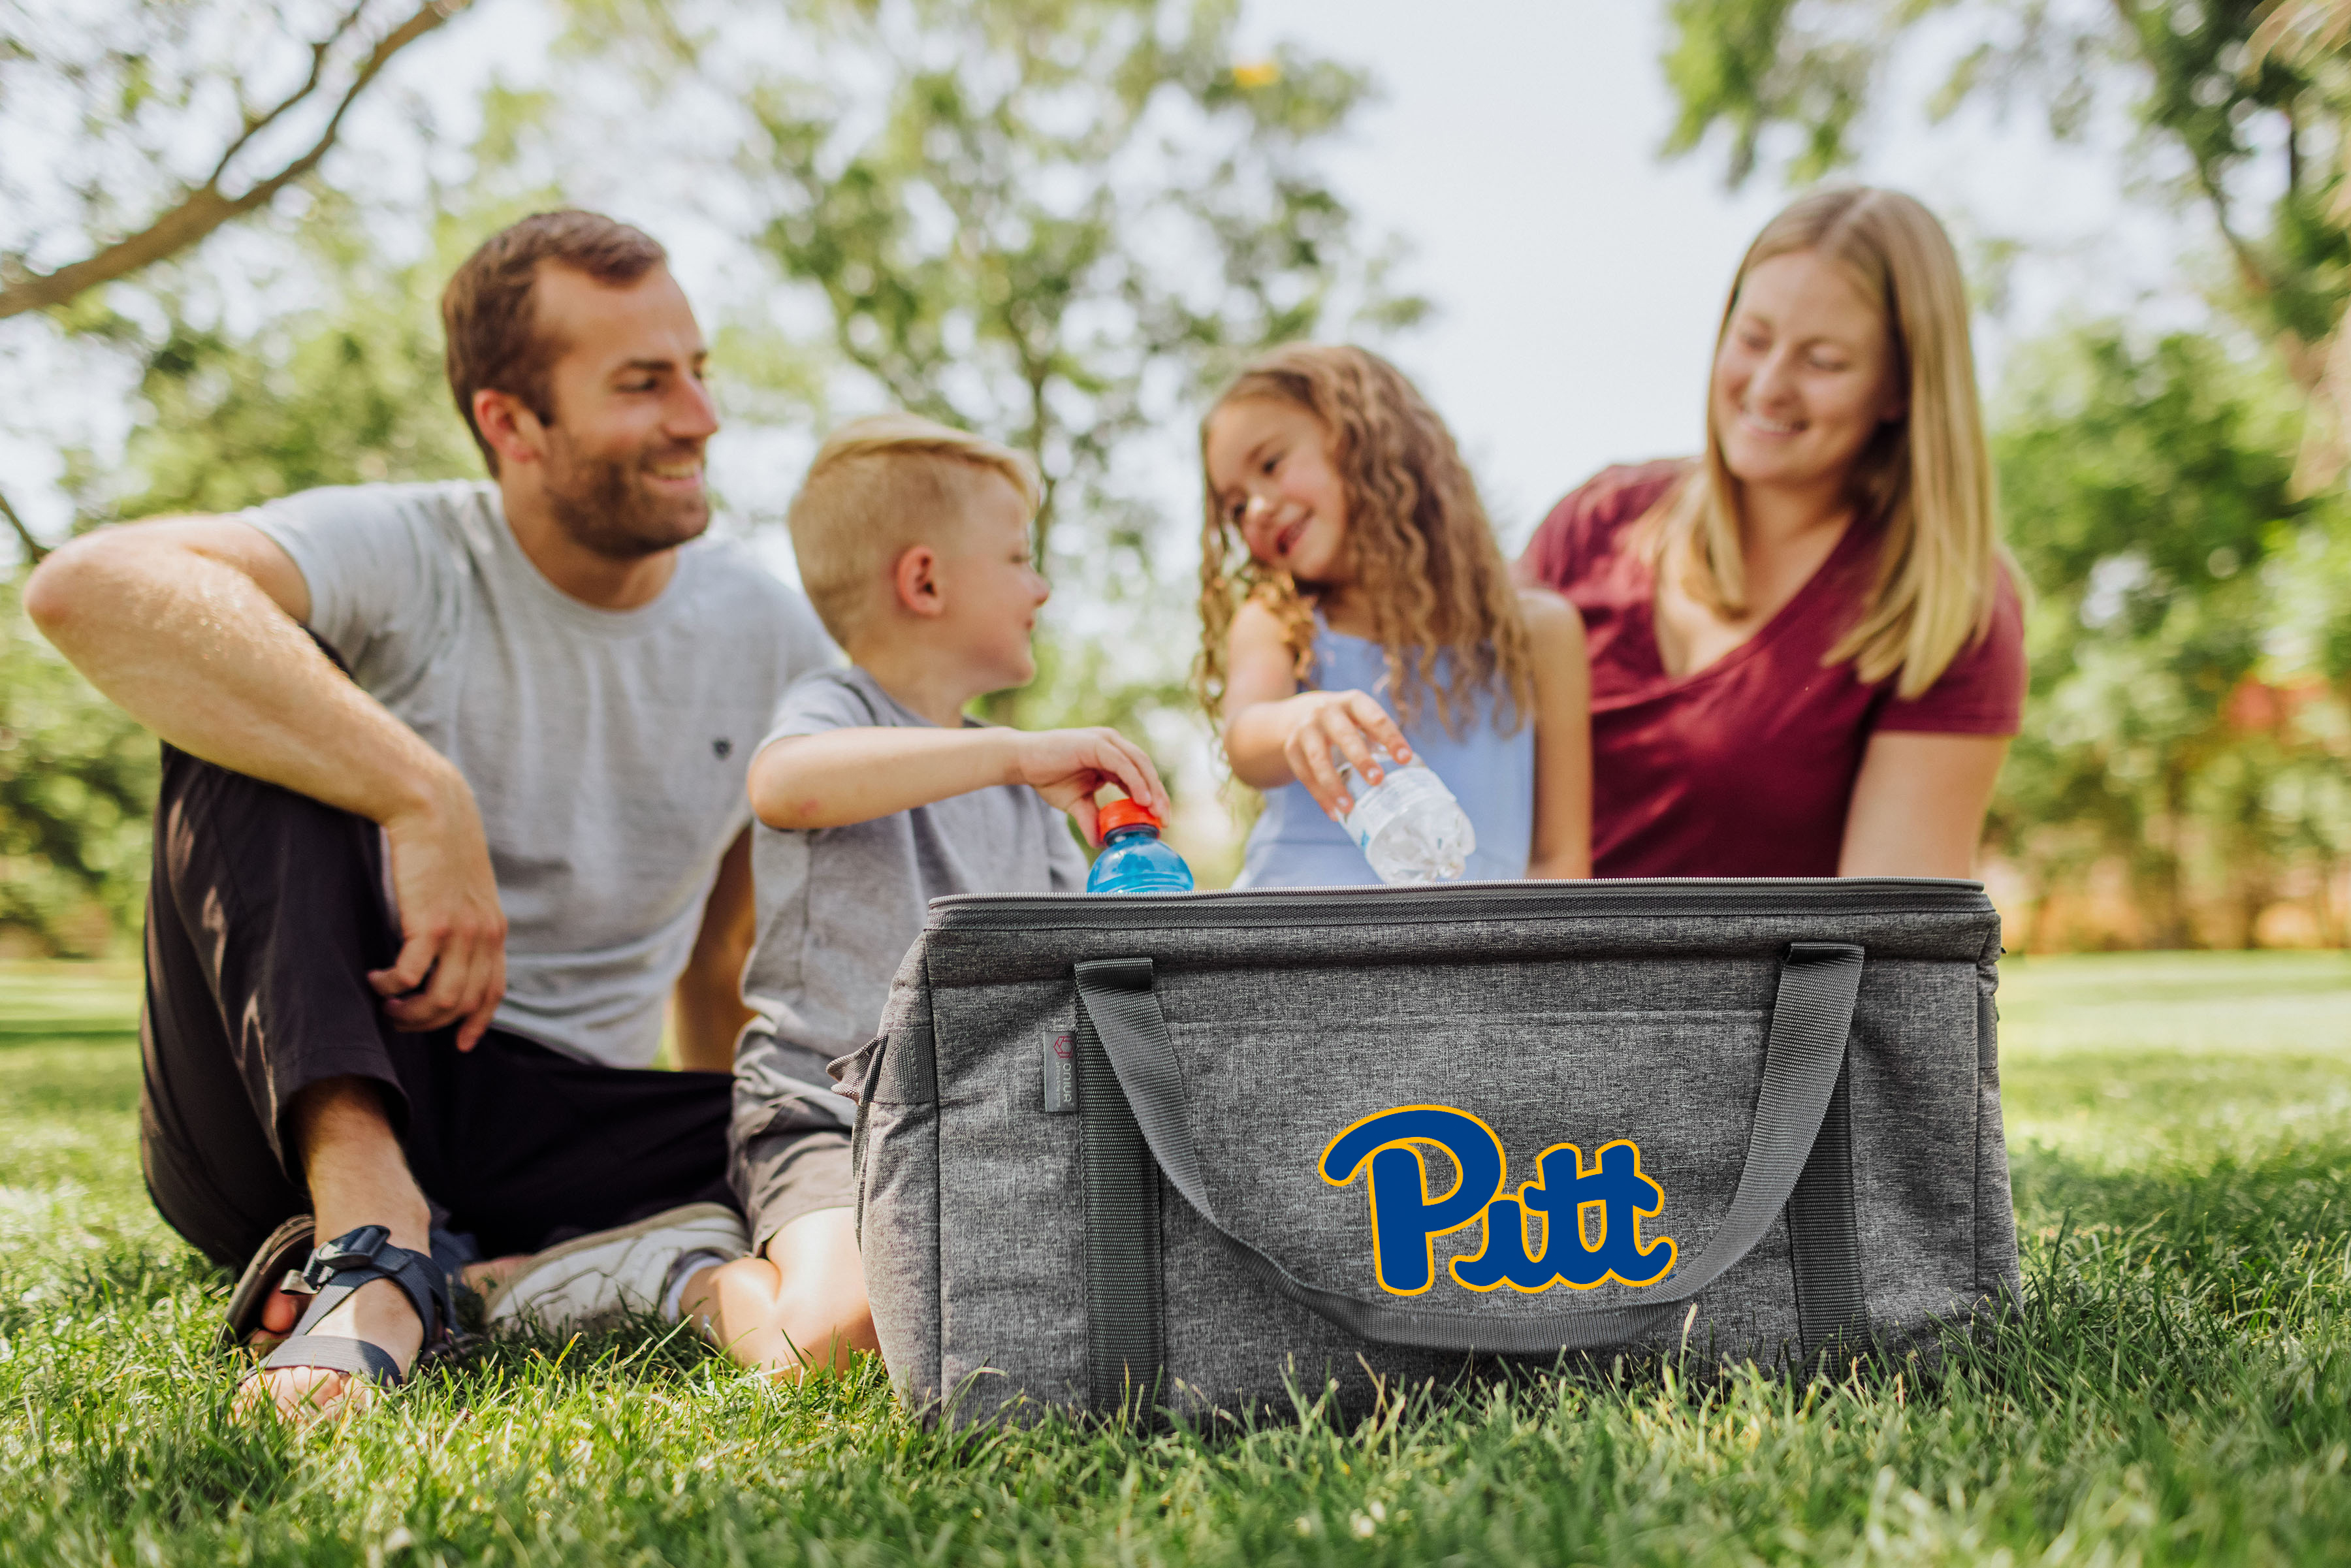 Pittsburgh Panthers - 64 Can Collapsible Cooler